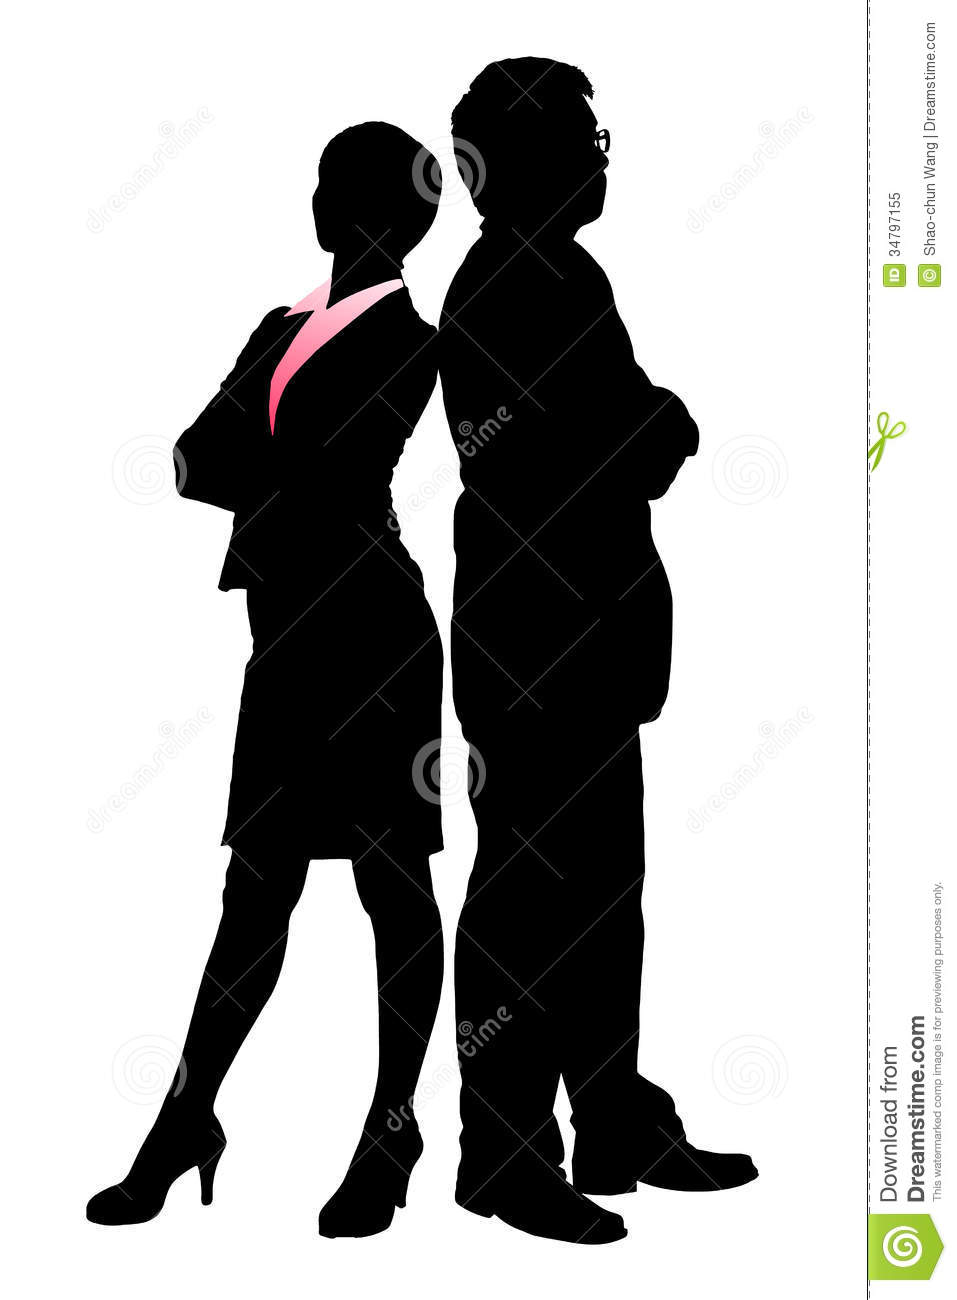 Silhouettes Of Business Team With White Background